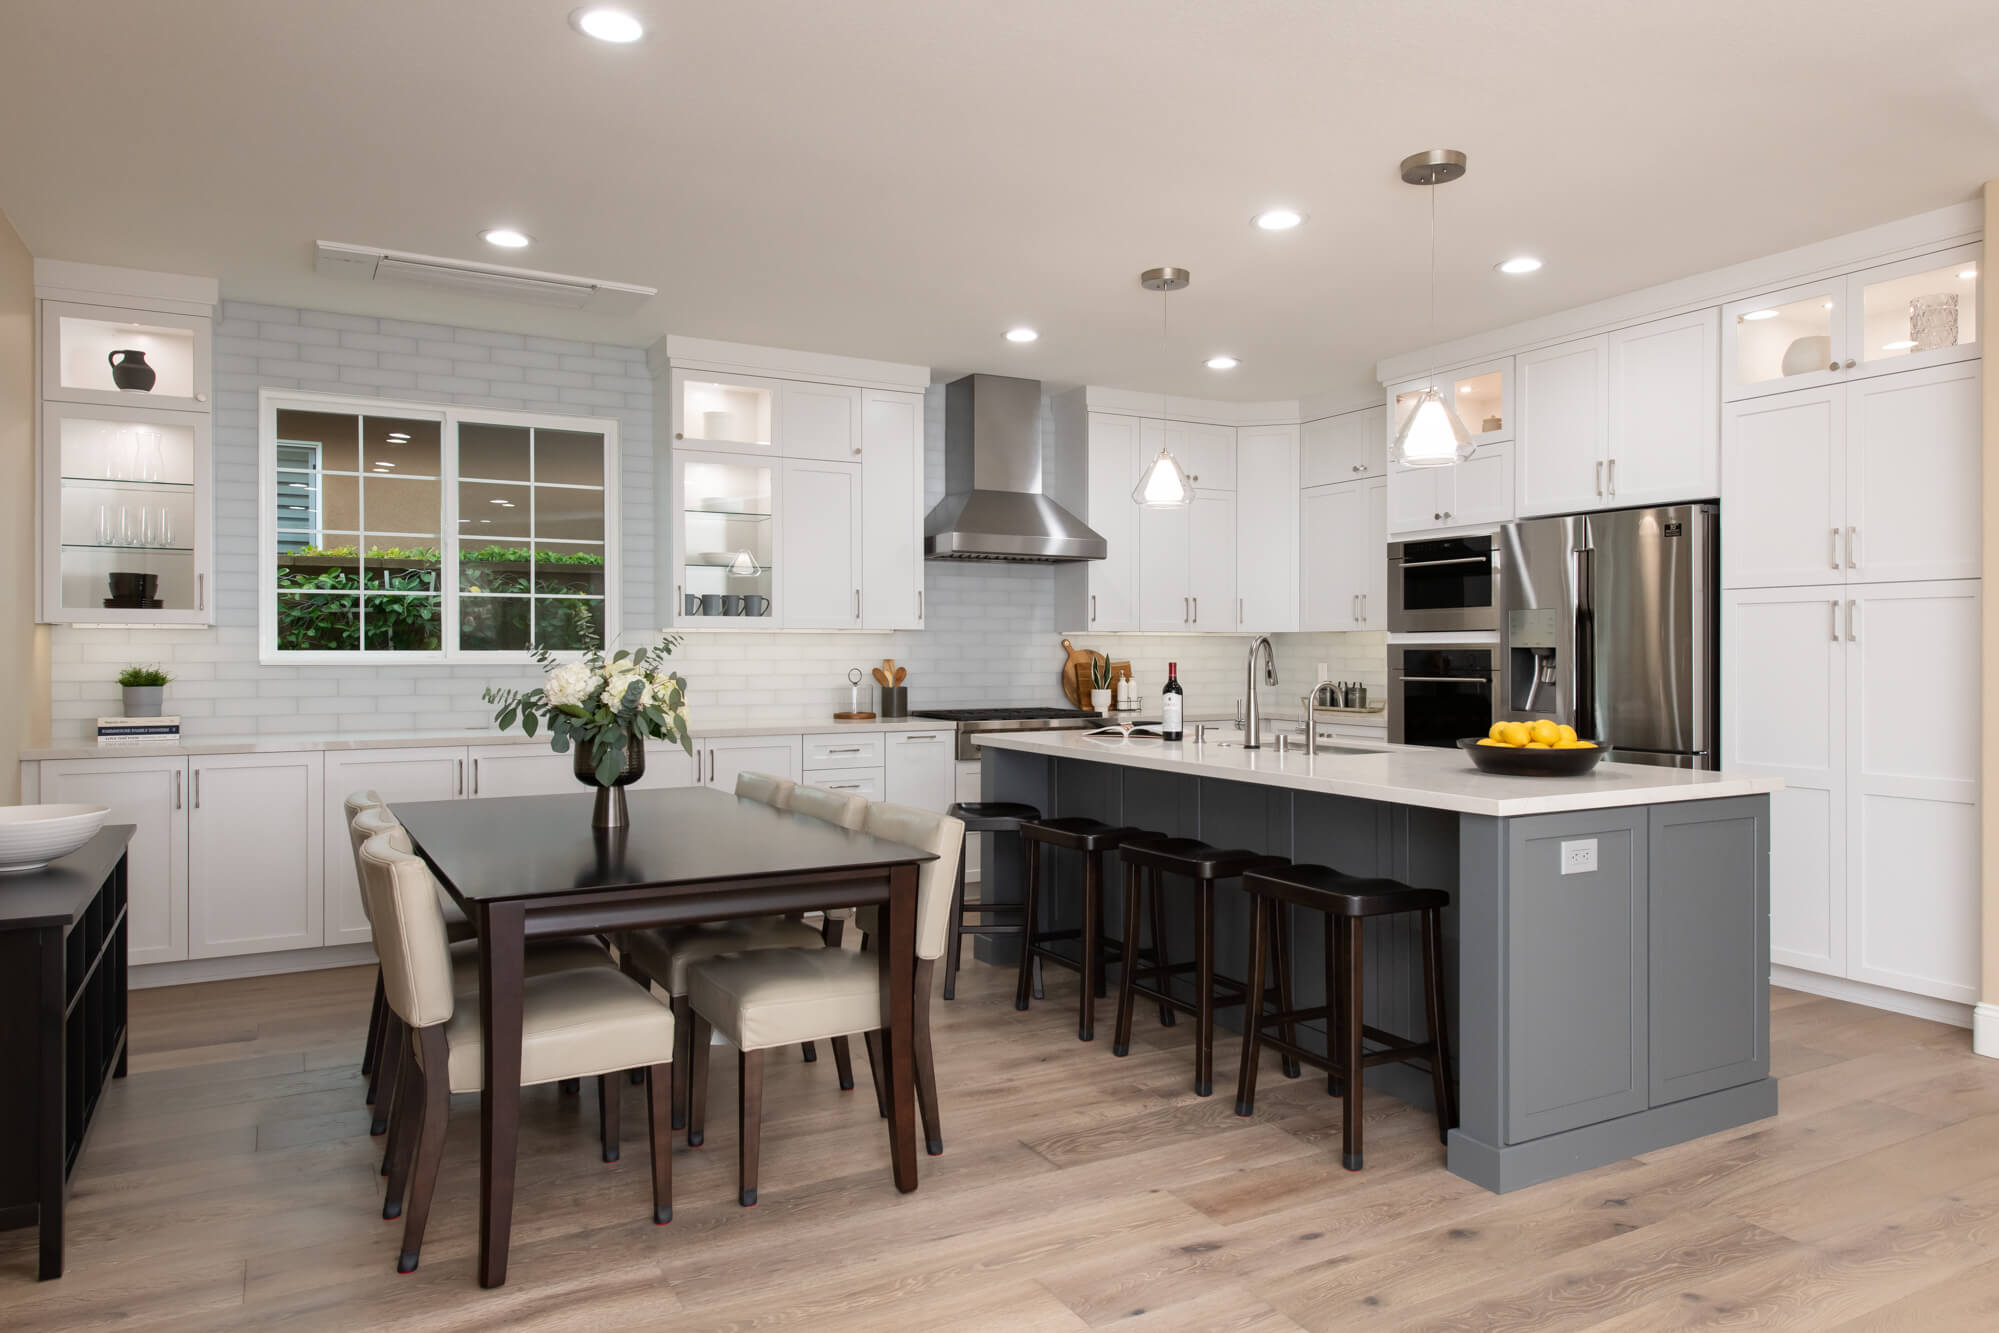 Open concept kitchen layout in Irvine remodel - how to plan your remodel